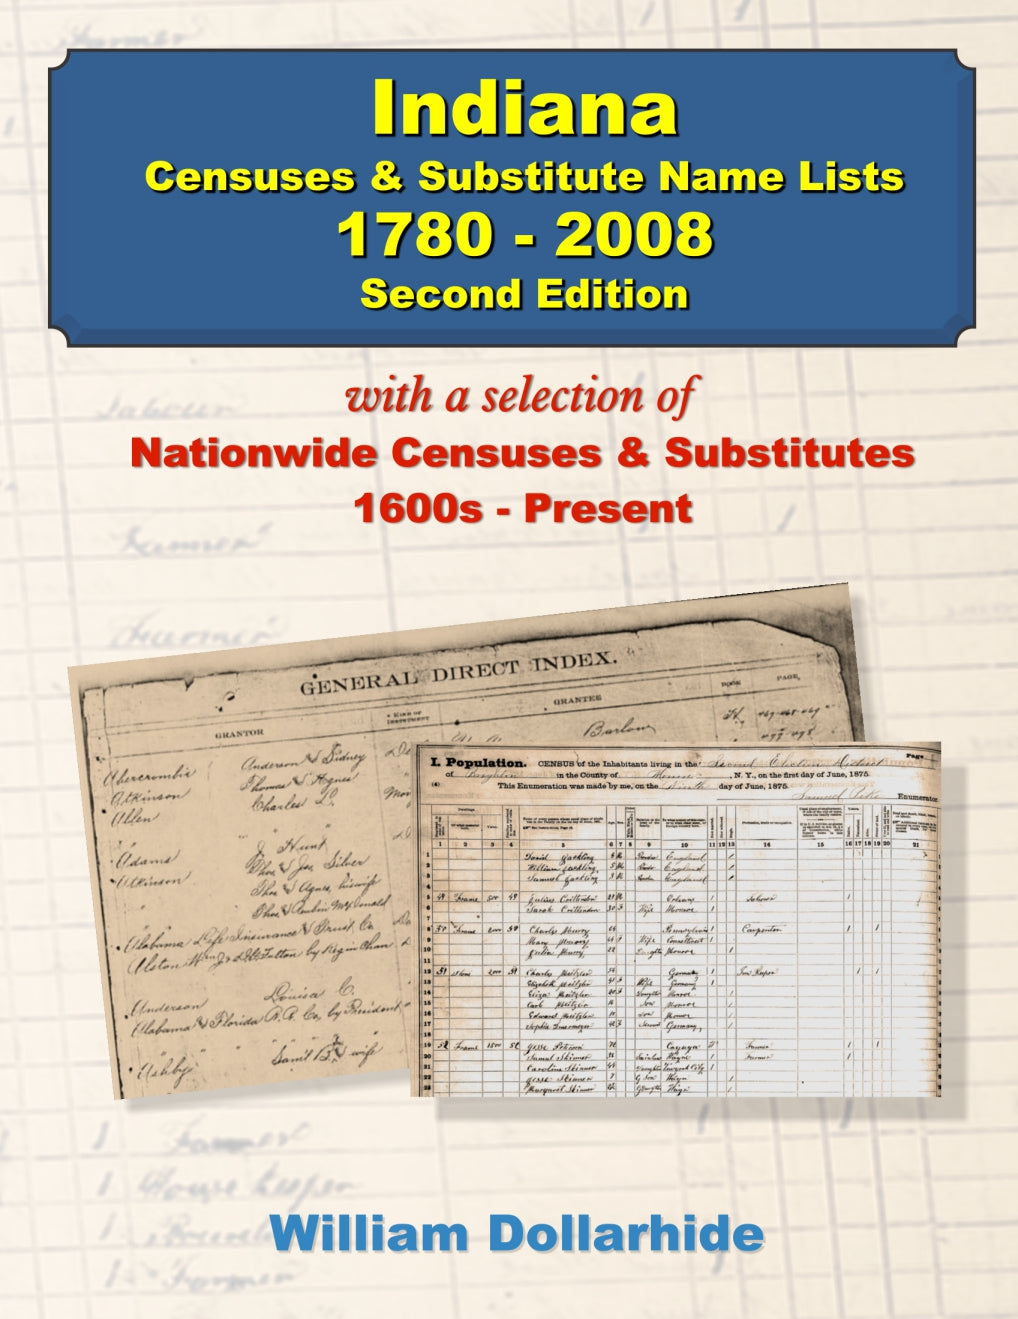 Indiana Censuses & Substitute Name Lists, 1780-2008 - Second Edition - PDF eBook